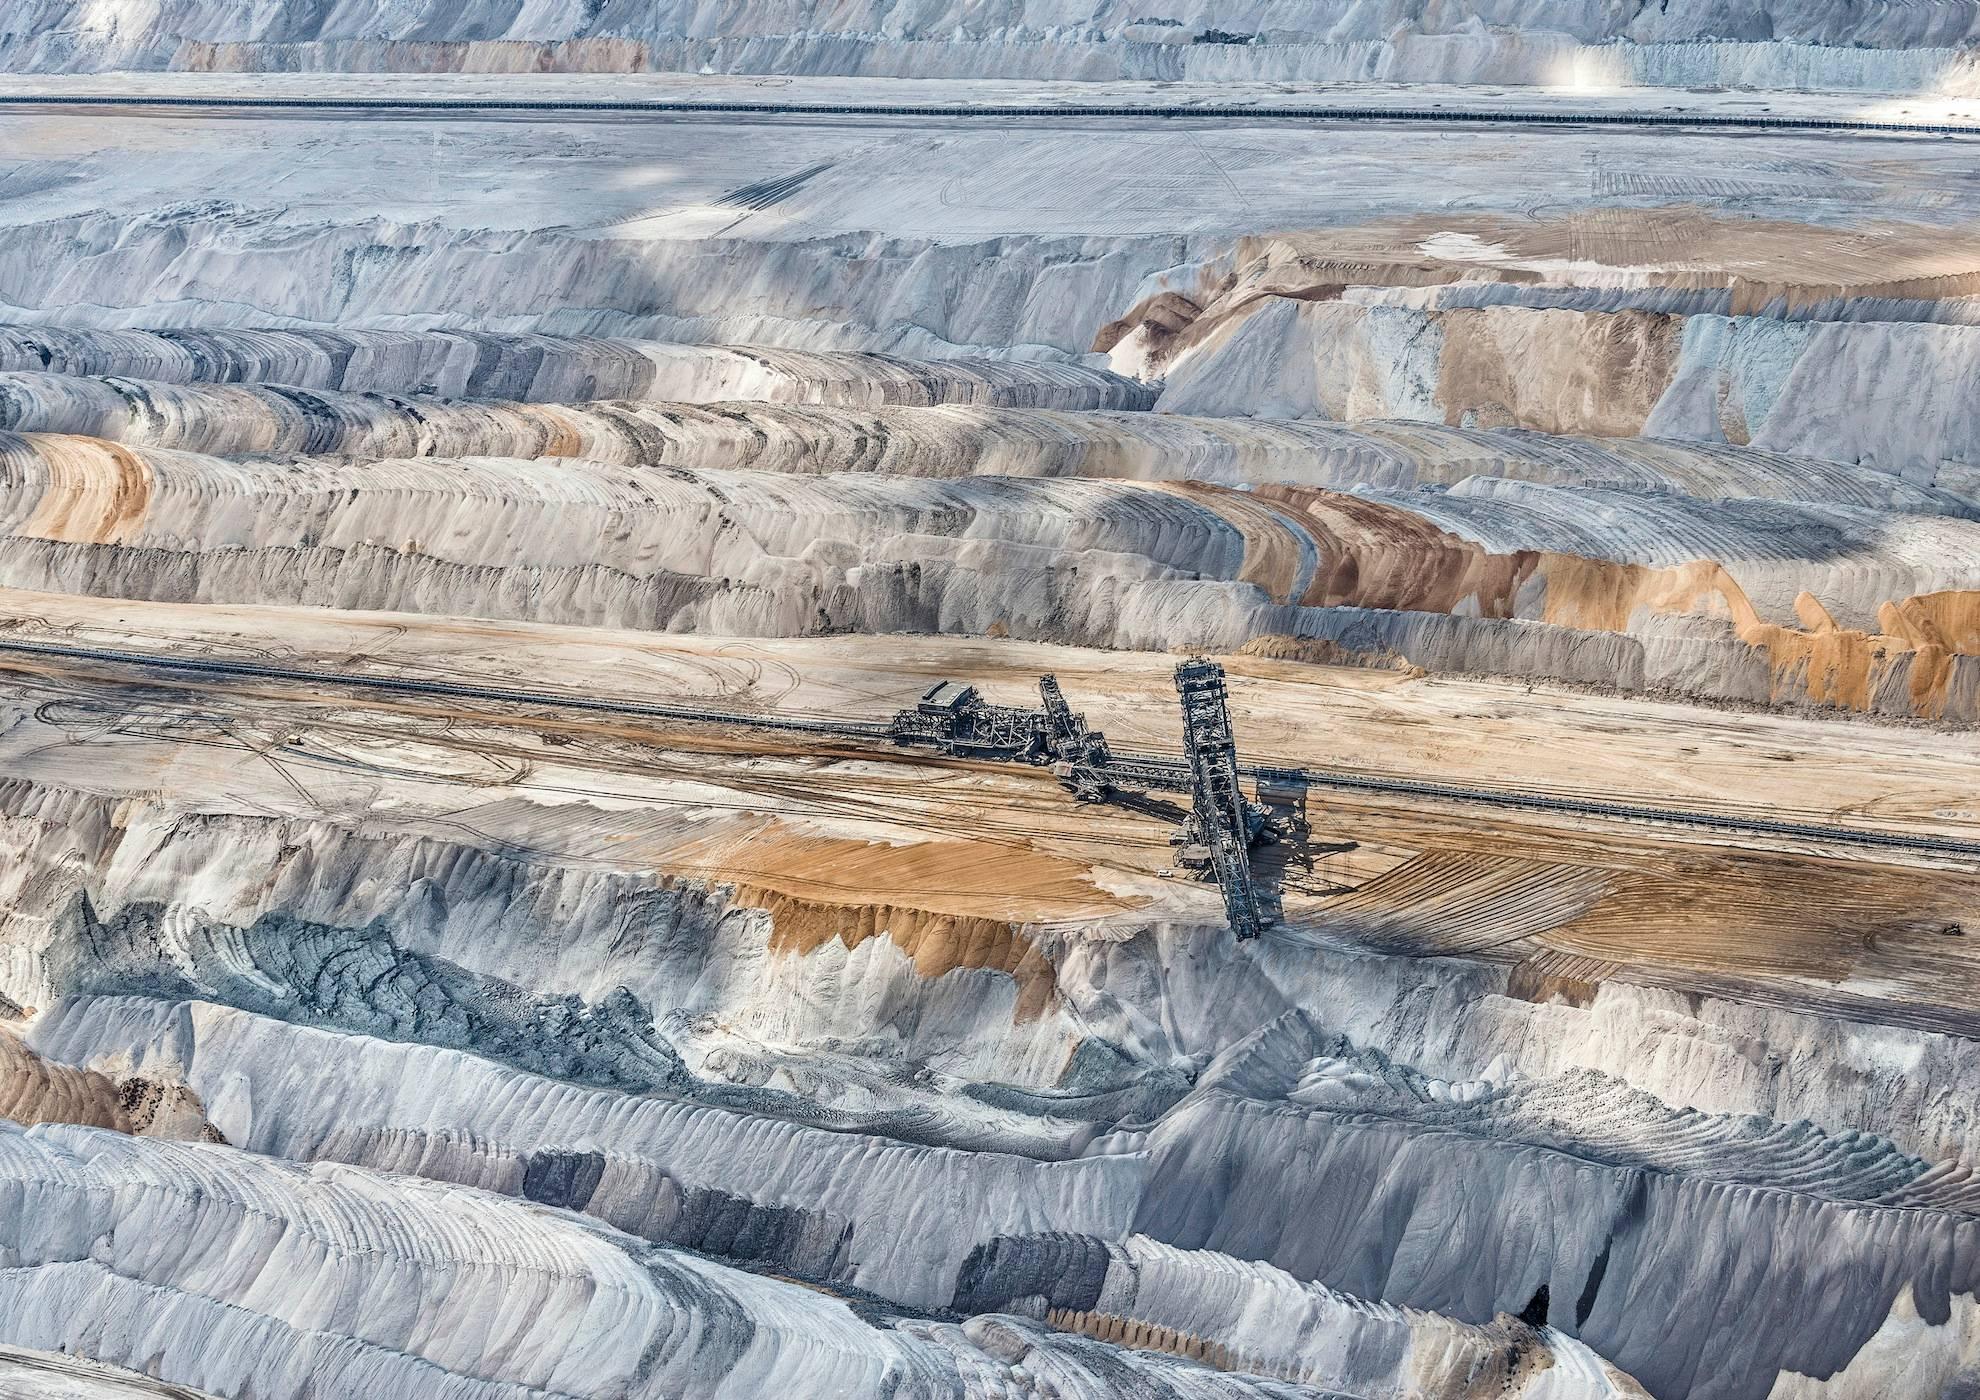 Coal Mine 2 by Bernhard Lang - Aerial photography, 41.7 x 59.1 in. print